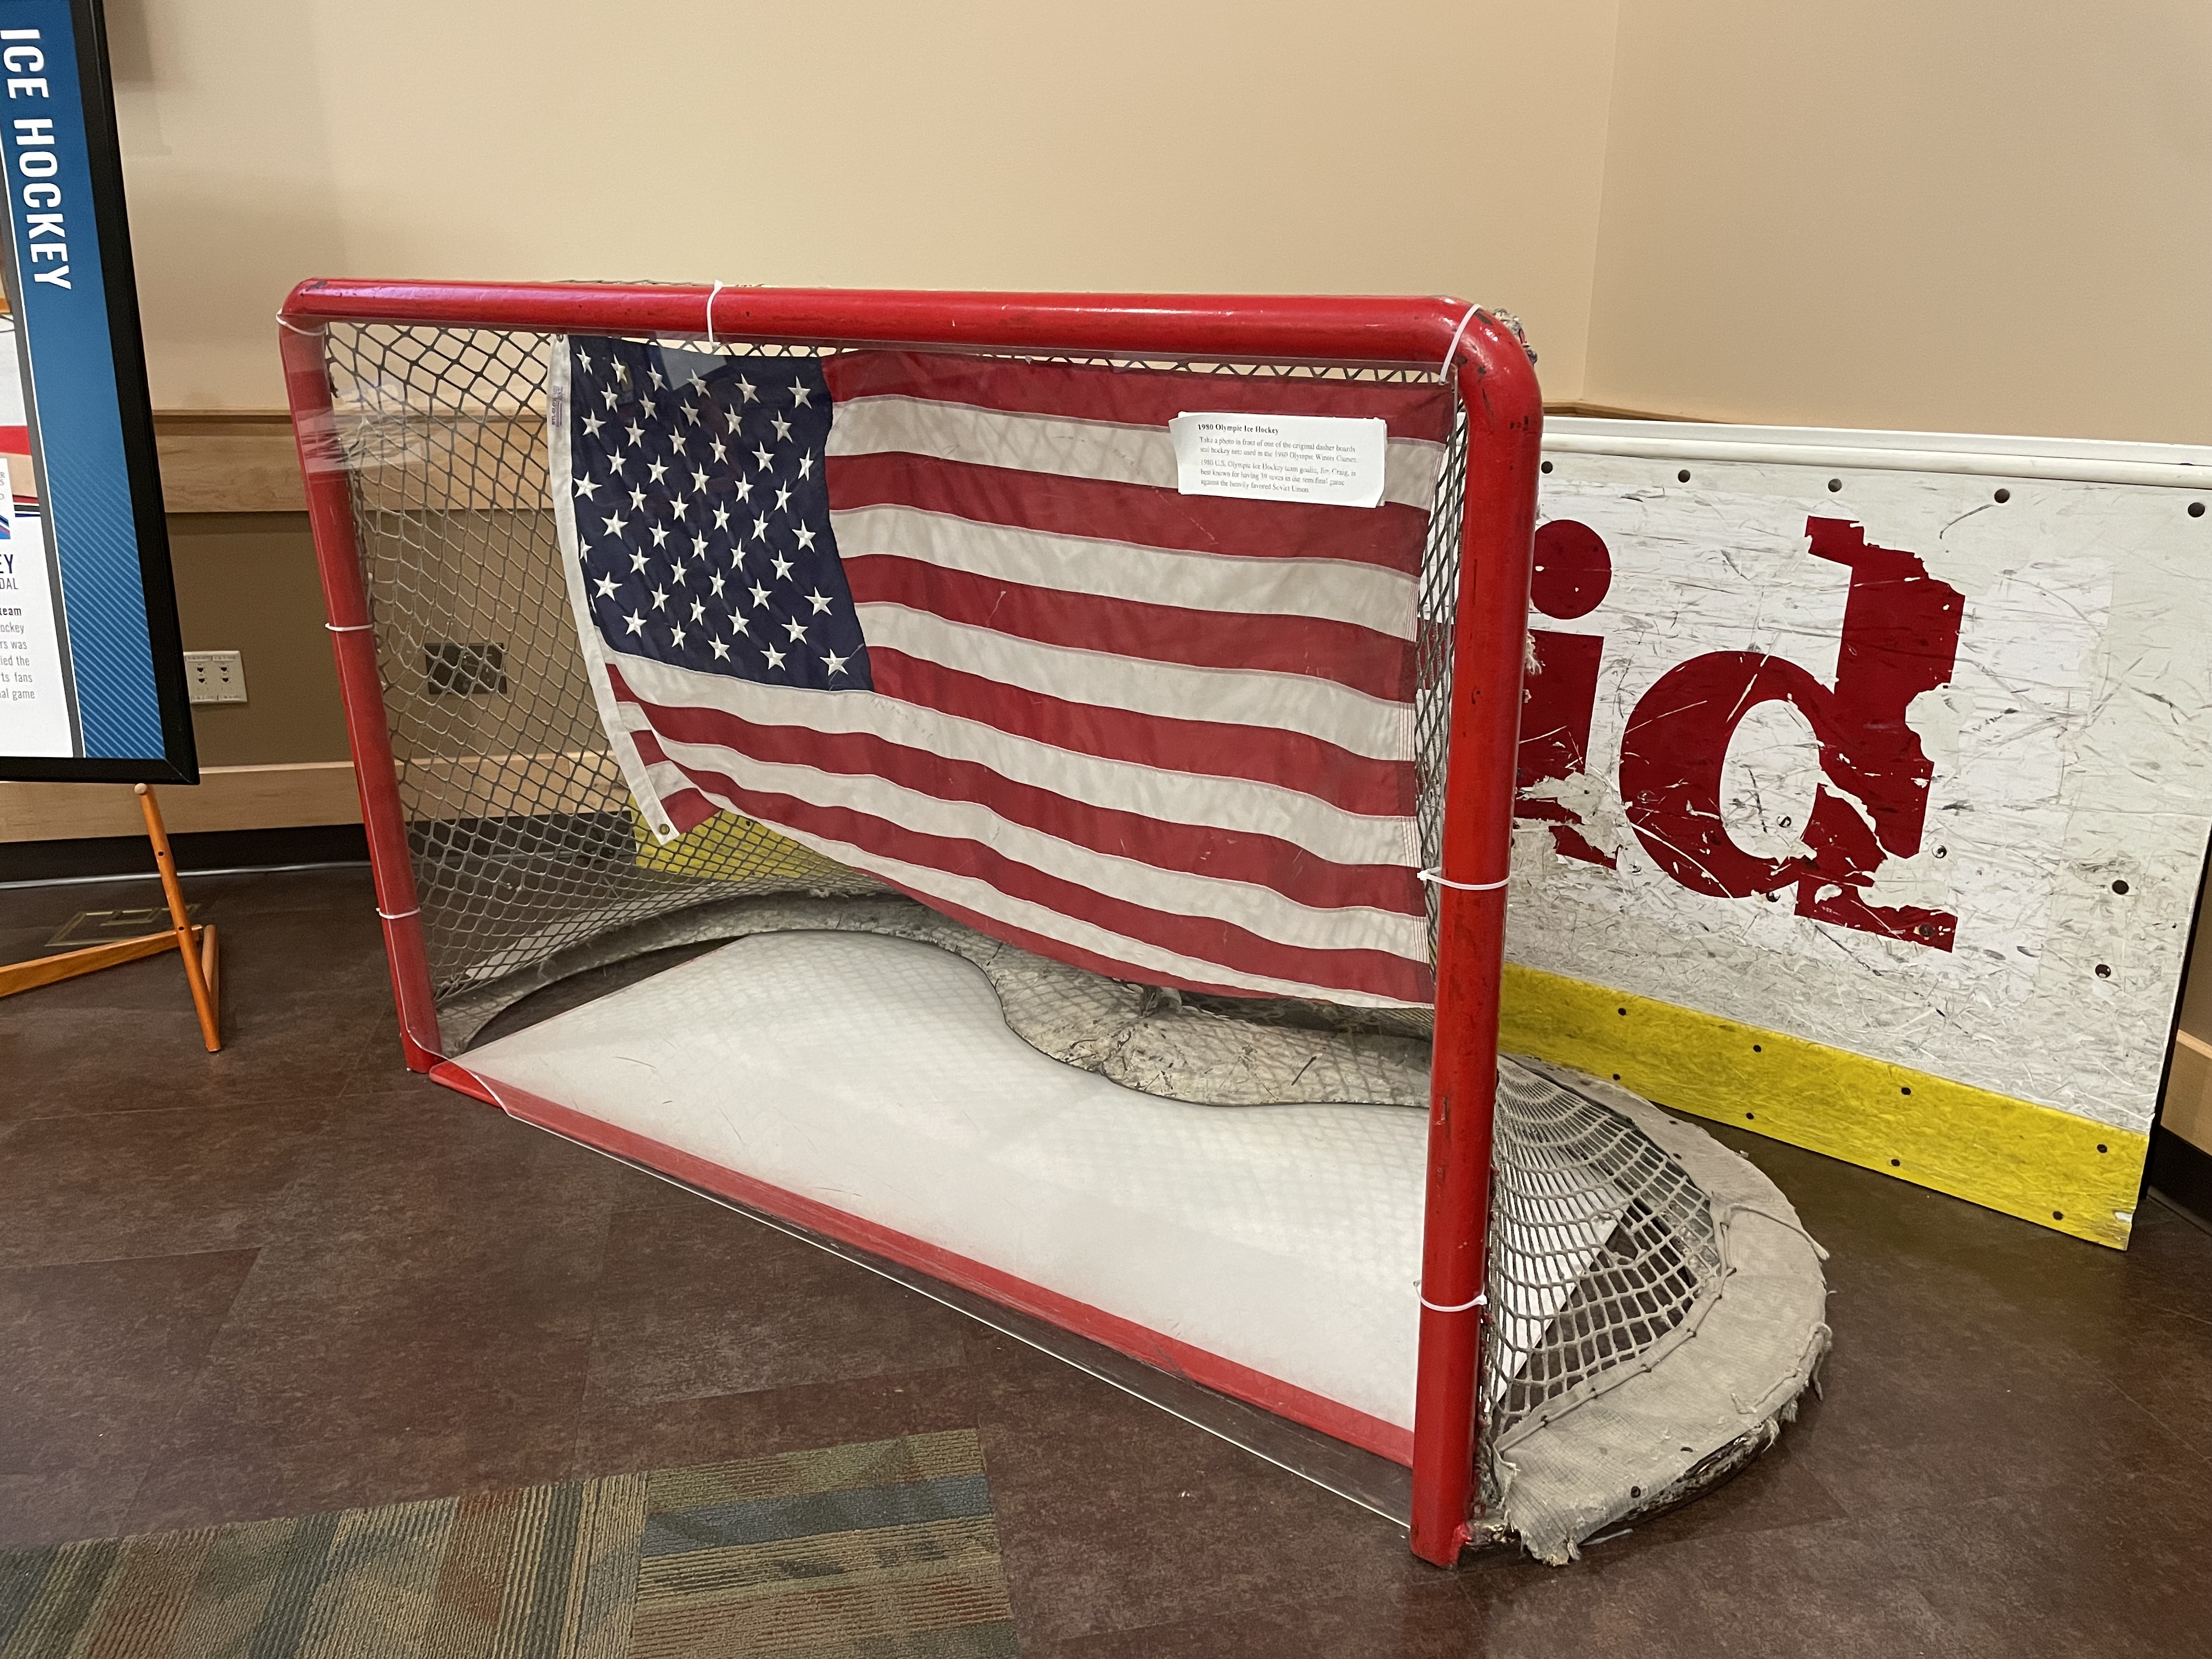 A hockey goal net and rink boards on display. They were used in the 1980 Olympic Winter Games.